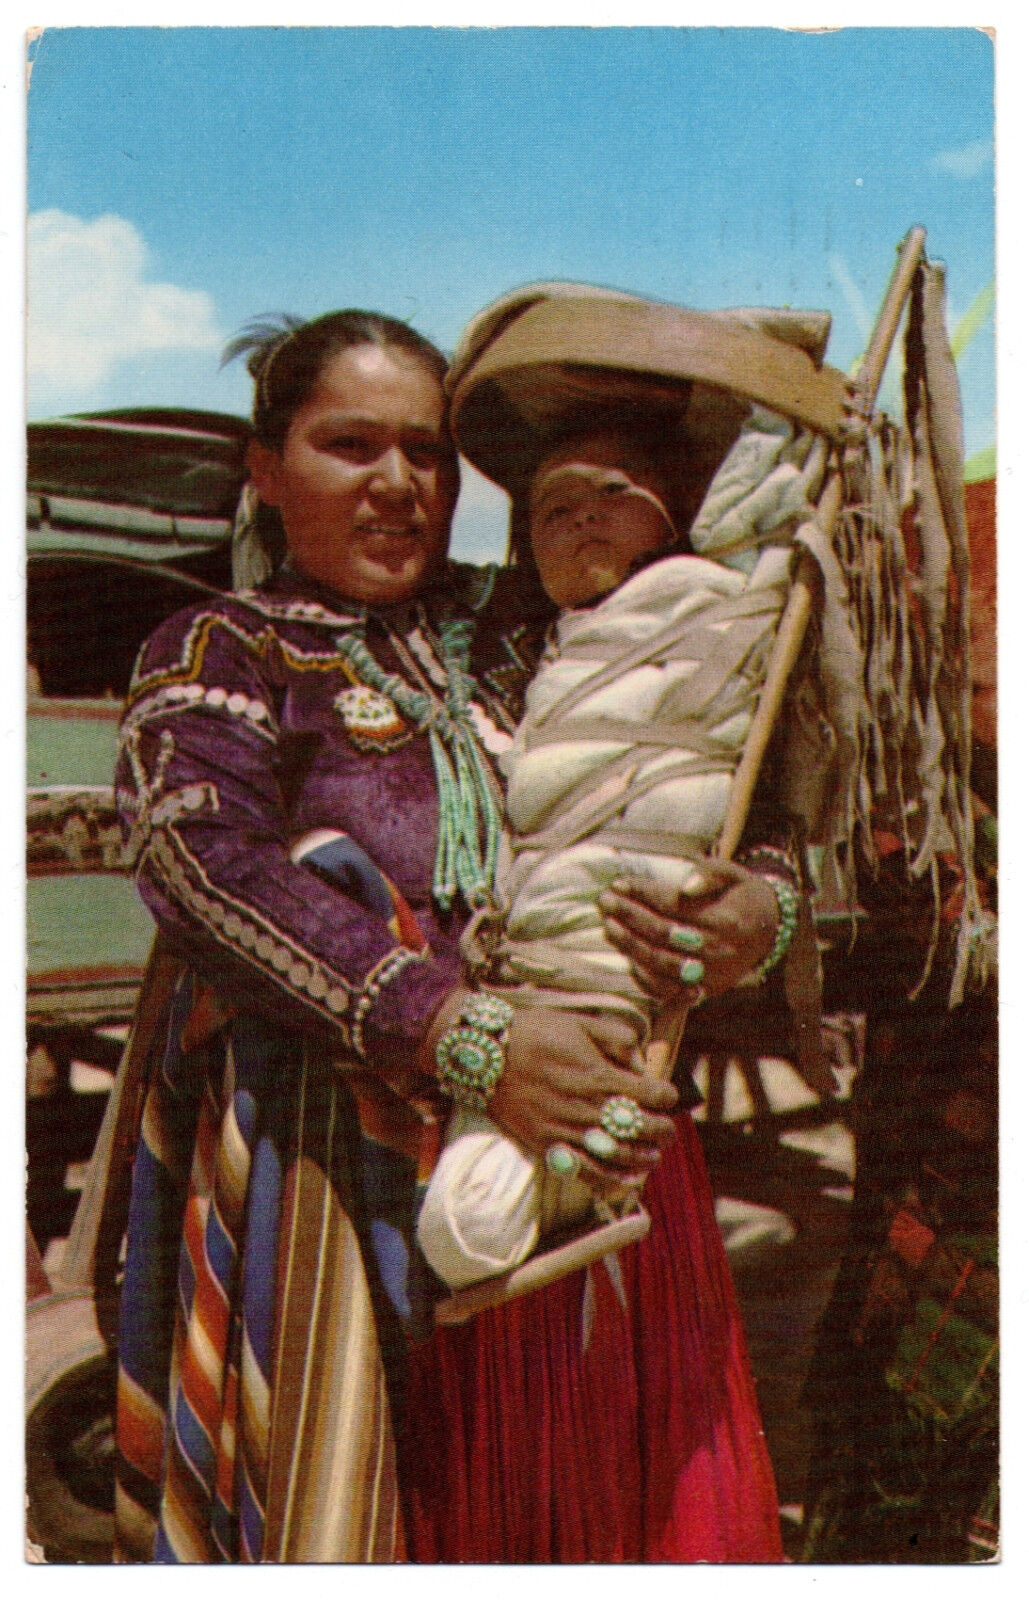 CPSM PF USA - NAVAJO Family and Baby